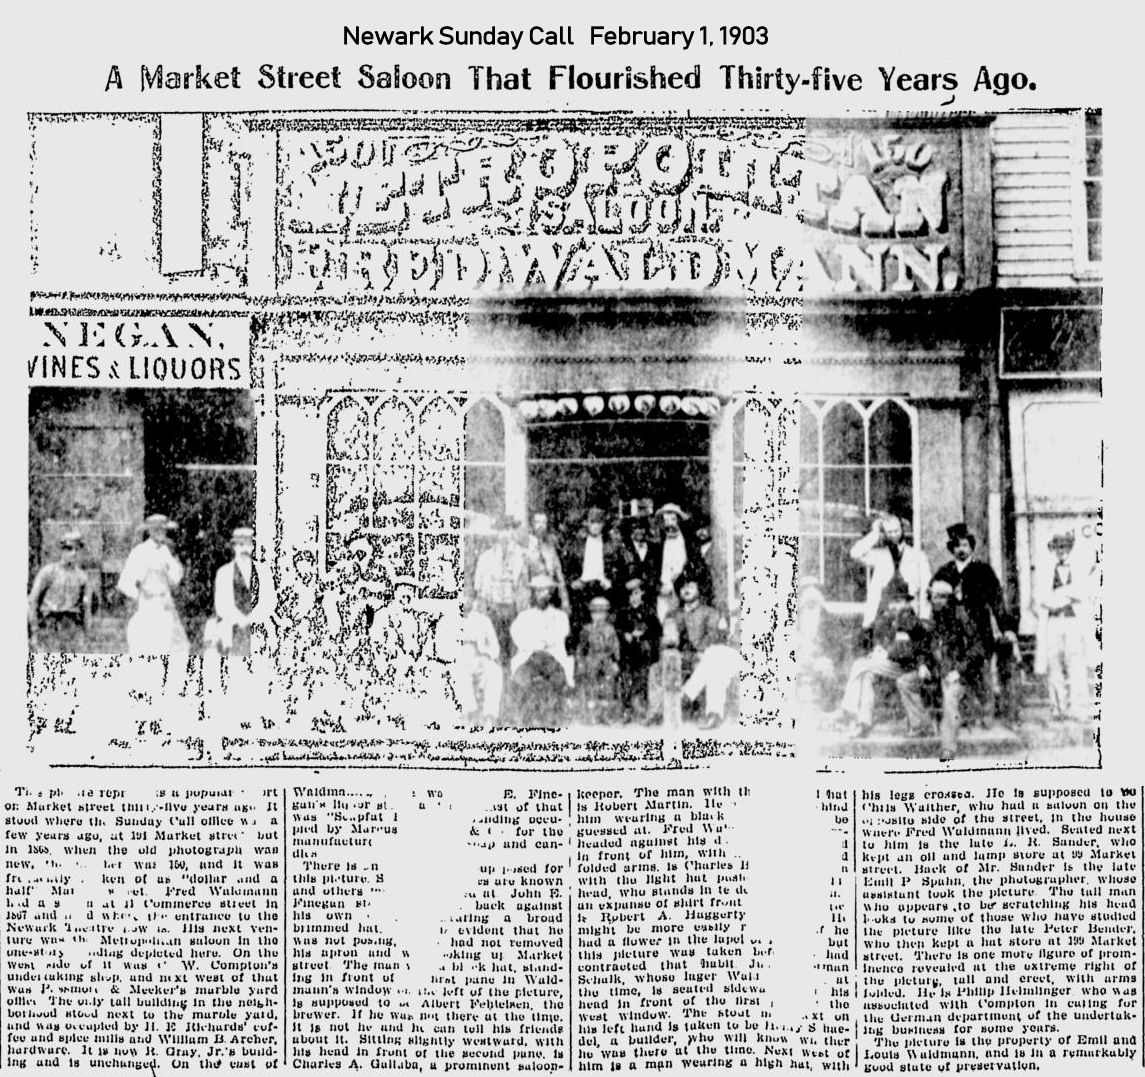 A Market Street Saloon that Flourished 35 Years Ago
February 1, 1903
